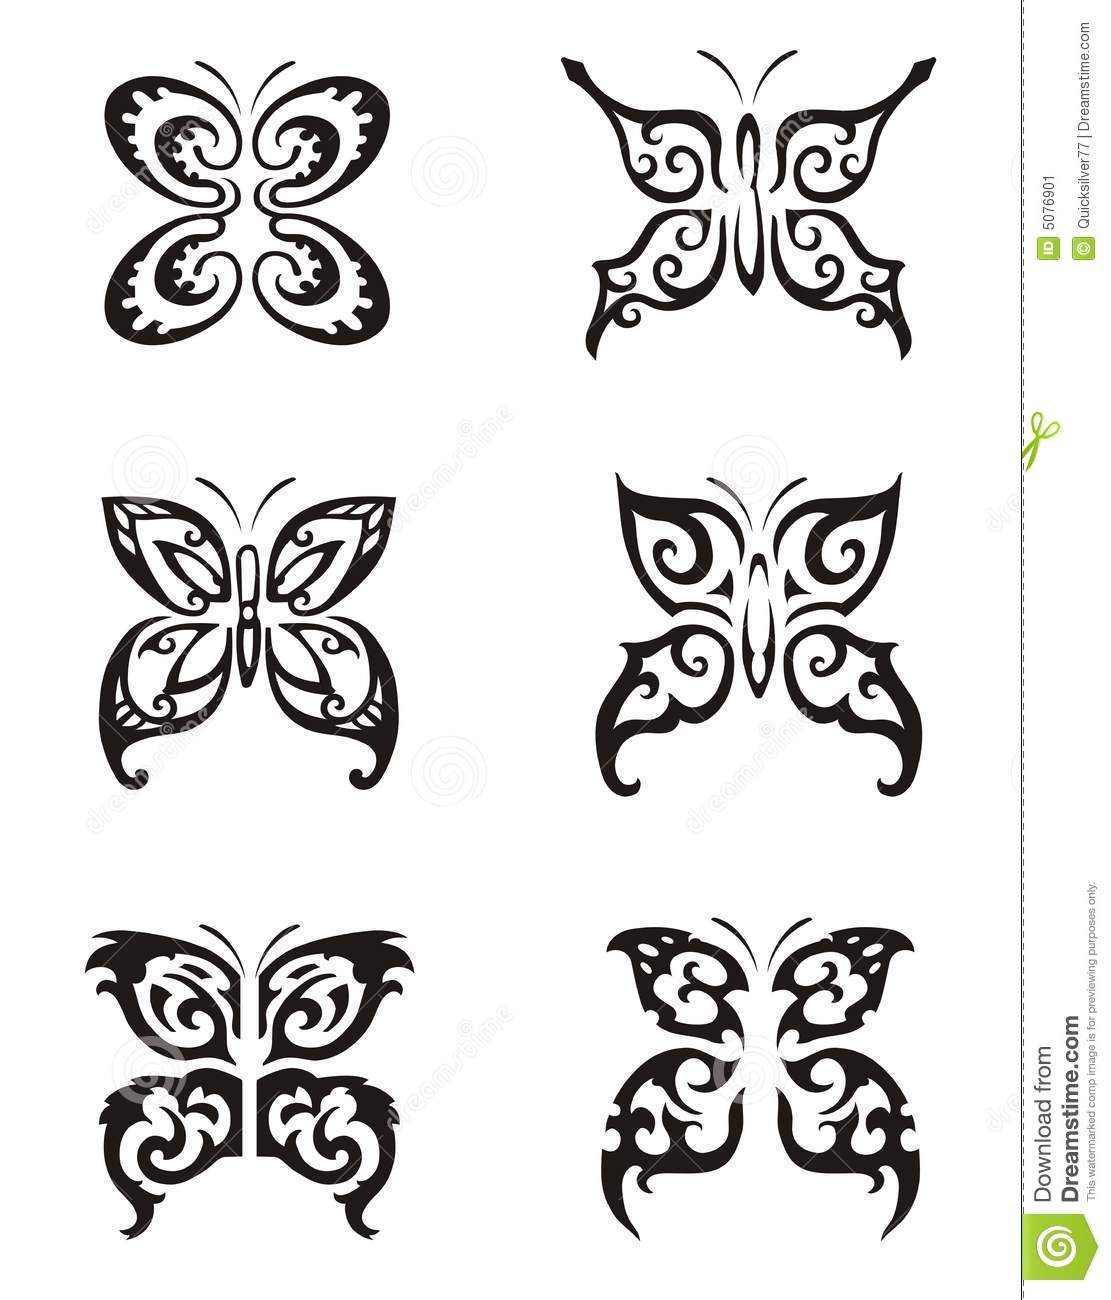 Butterfly Tattoo Series Stock Vector Illustration Of Elements 5076901 in size 1111 X 1300